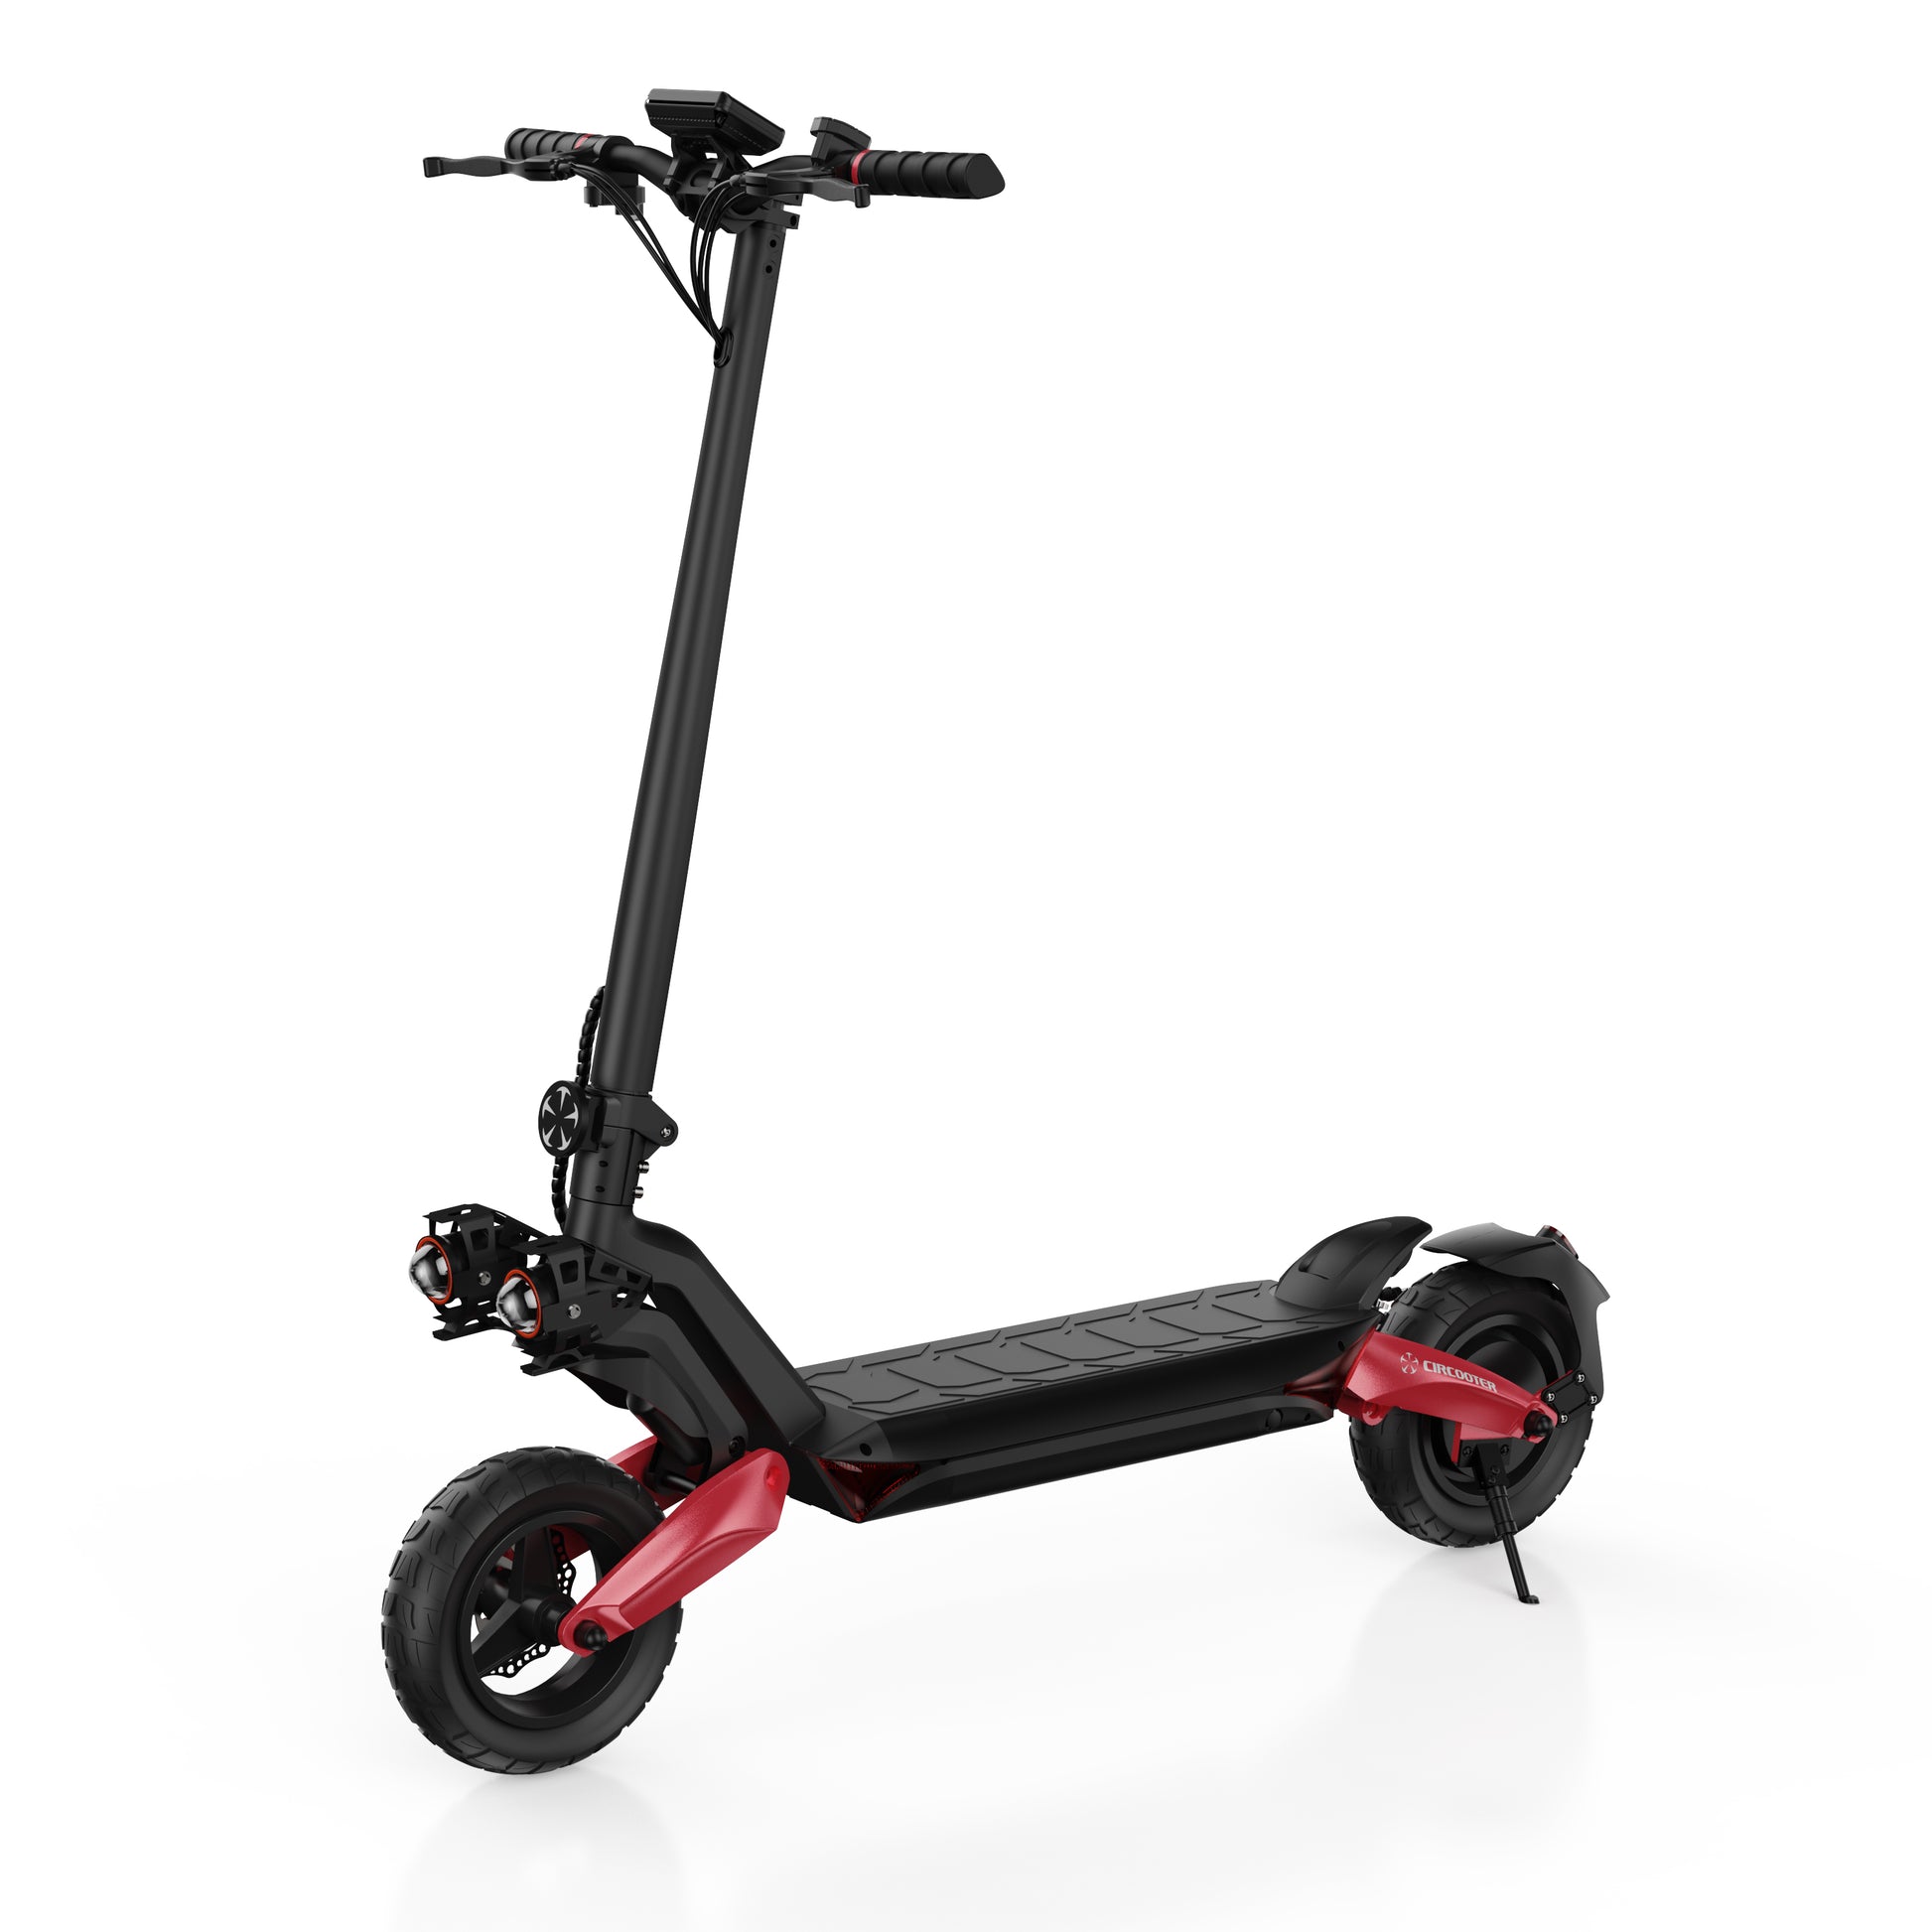 Electric scooter with strong climbing ability